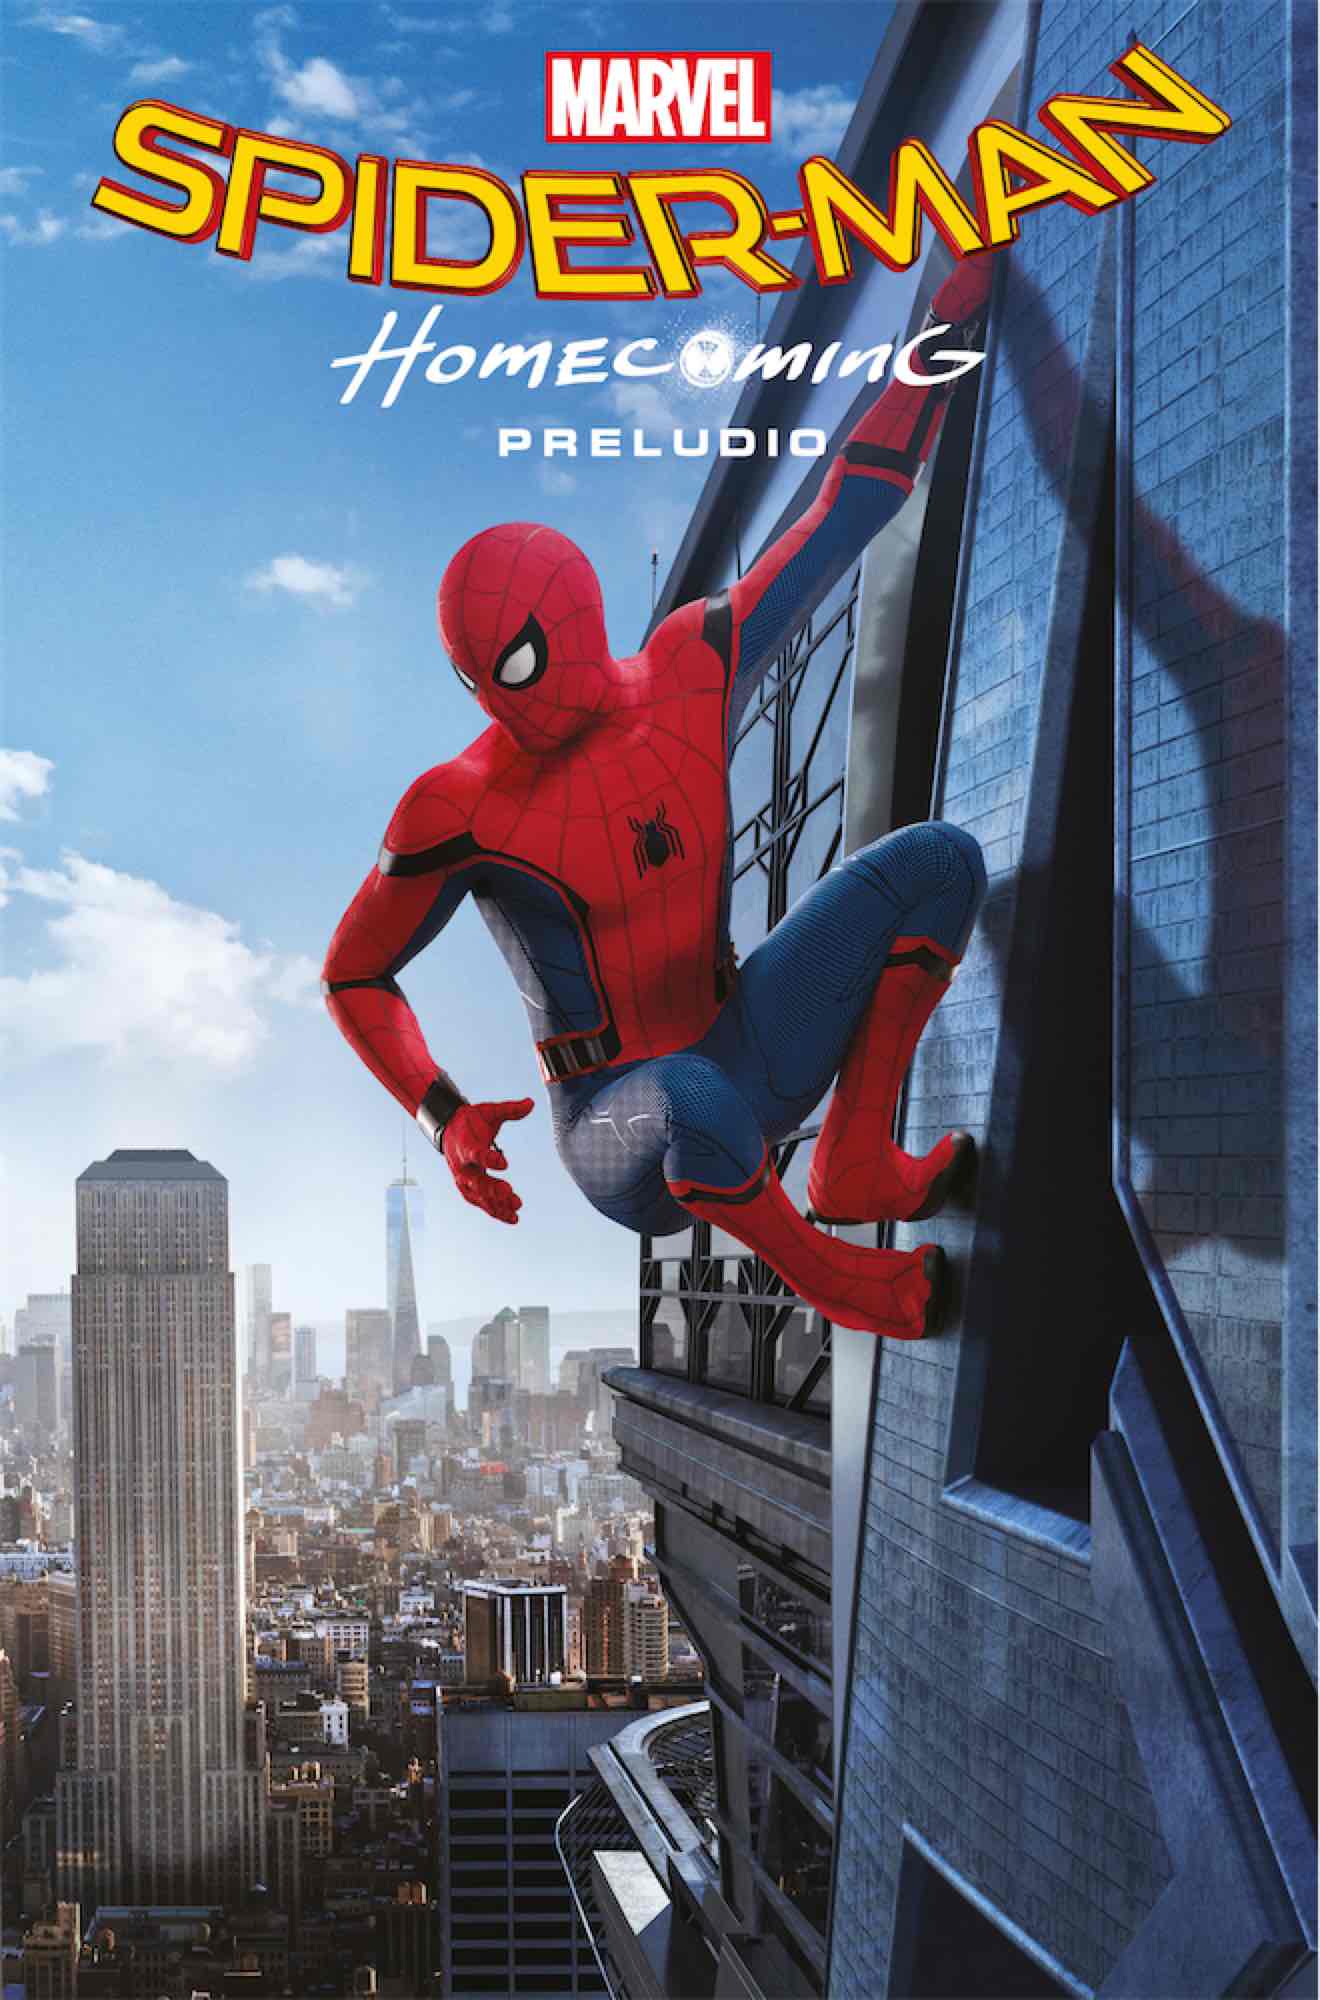 MARVEL CINEMATIC COLLECTION 01. SPIDER-MAN: HOMECOMING